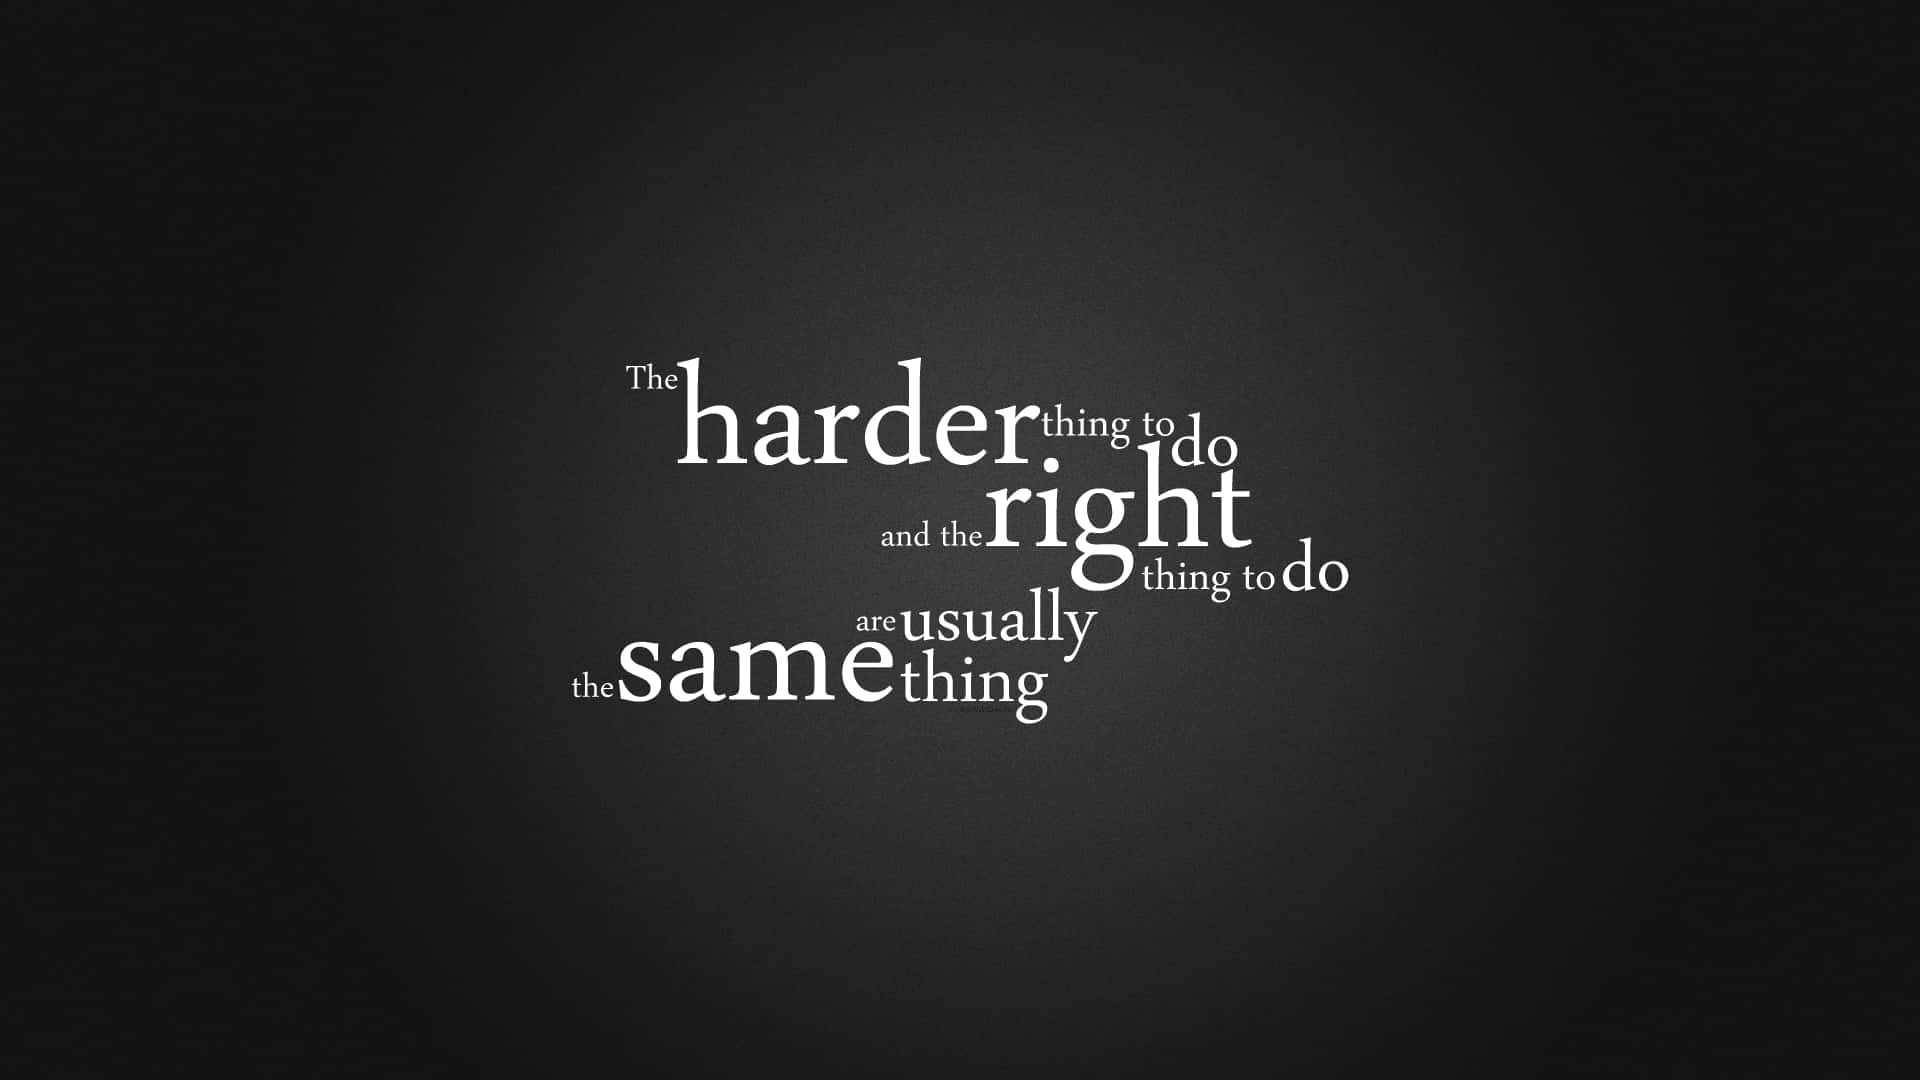 The Harder You Work, The Right You Do Wallpaper